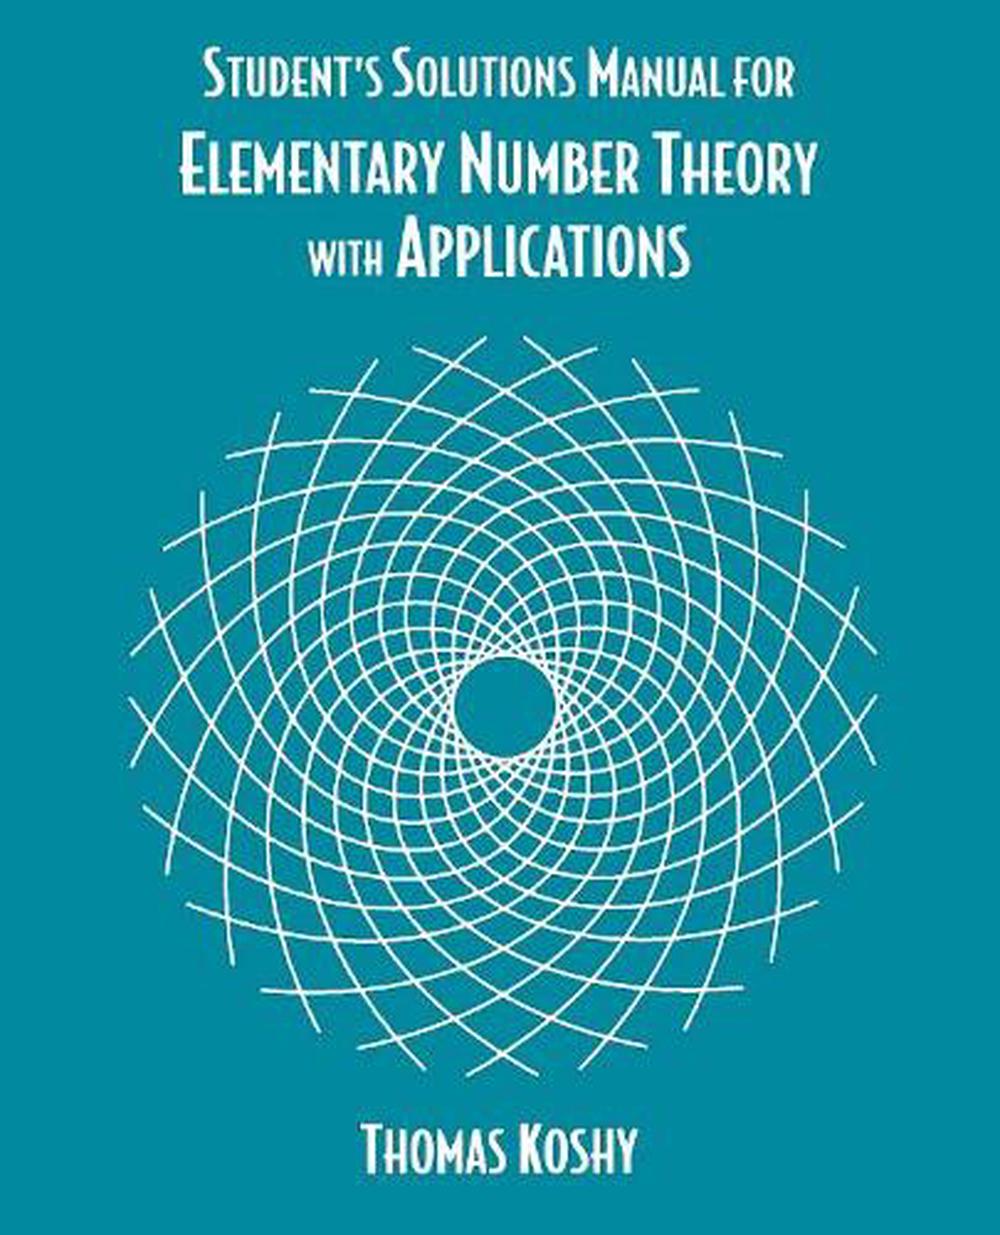 Elementary Number Theory with Applications, Student Solutions Manual by